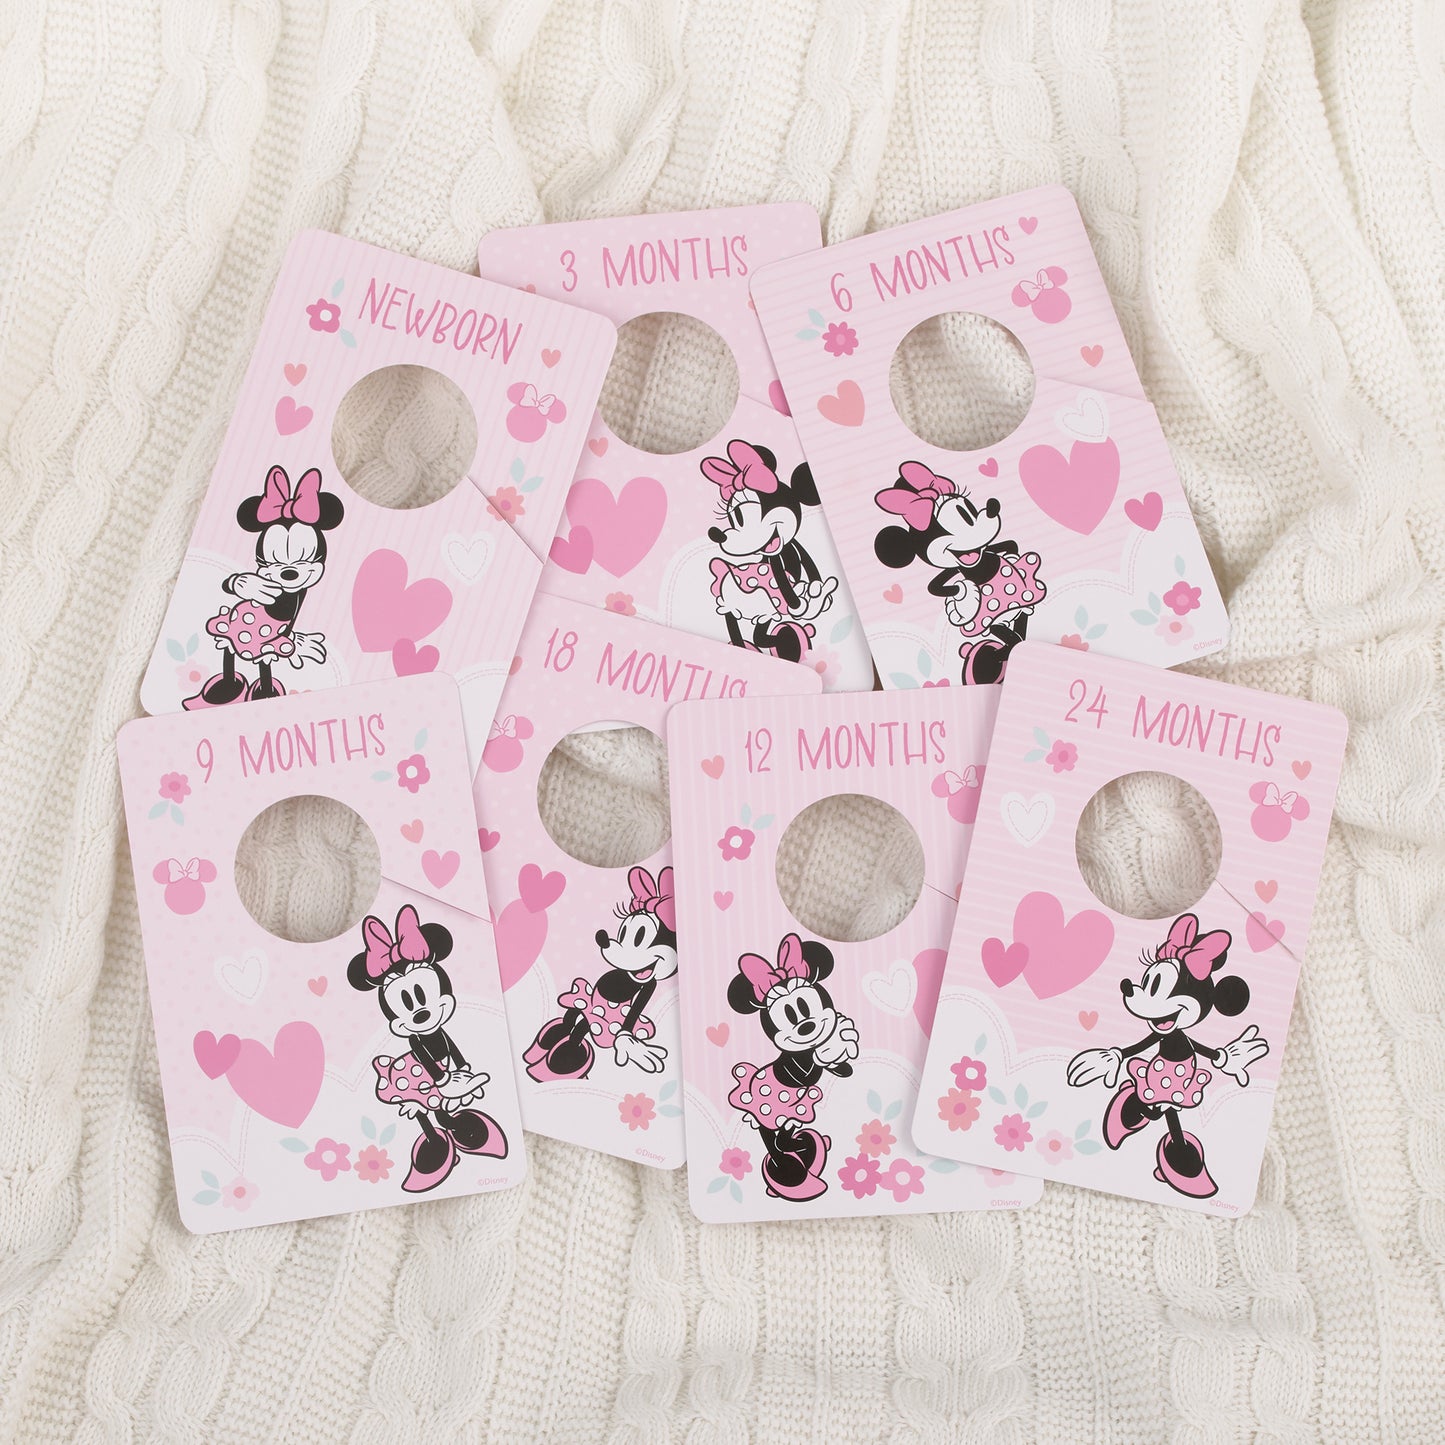 Disney Minnie Mouse Pink, Black, and White Nursery Baby Closet Dividers - Set of 7 Newborn to 24 Months